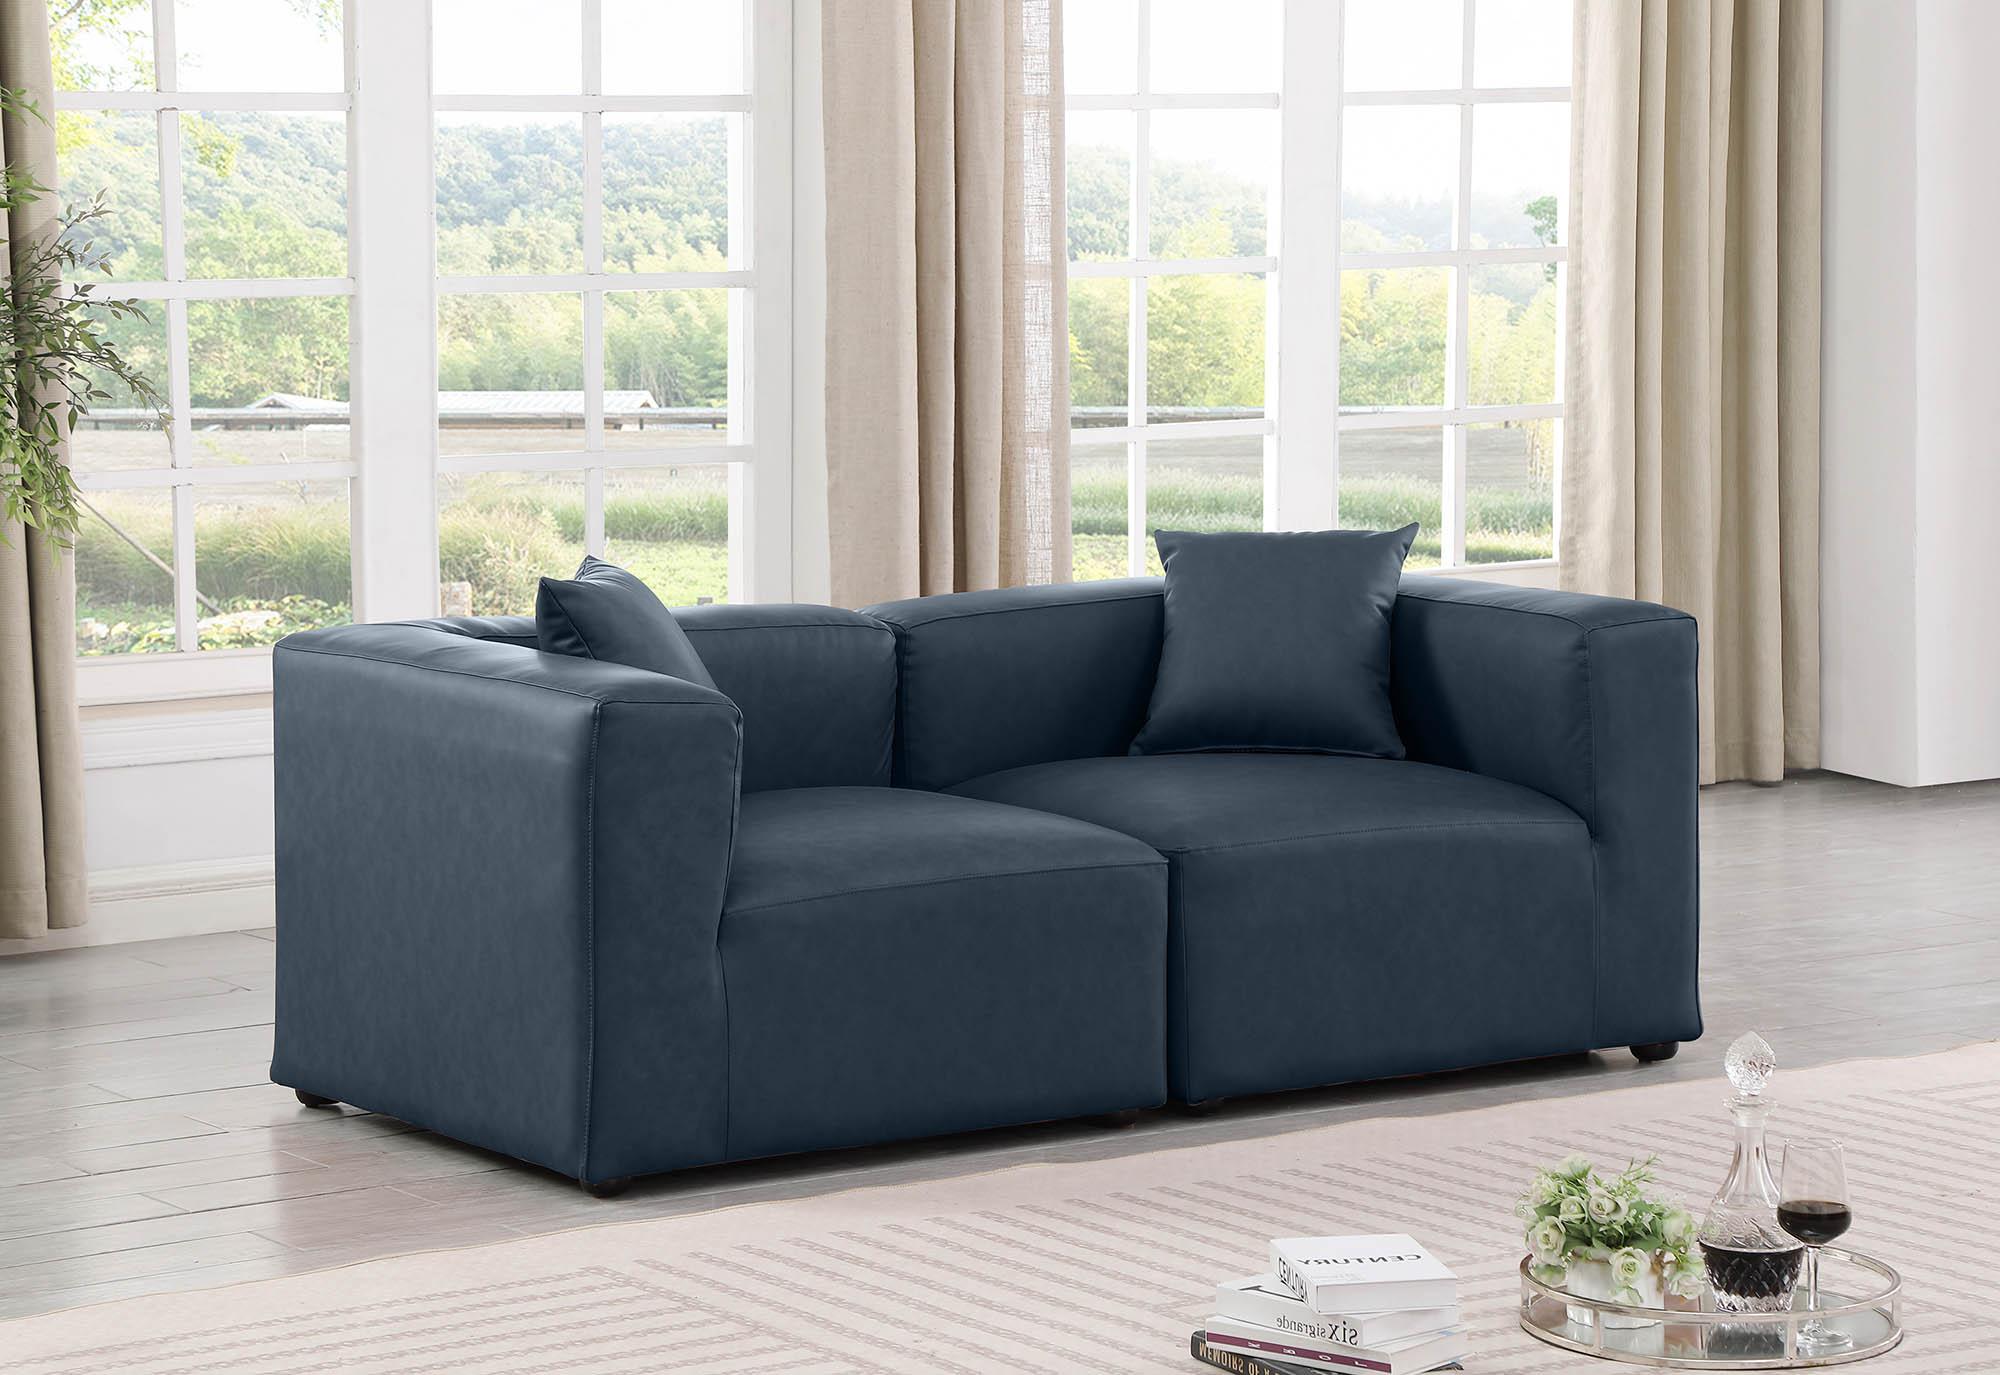 

    
Navy Faux Leather Modular Sofa CUBE 668Navy-S72B Meridian Contemporary
